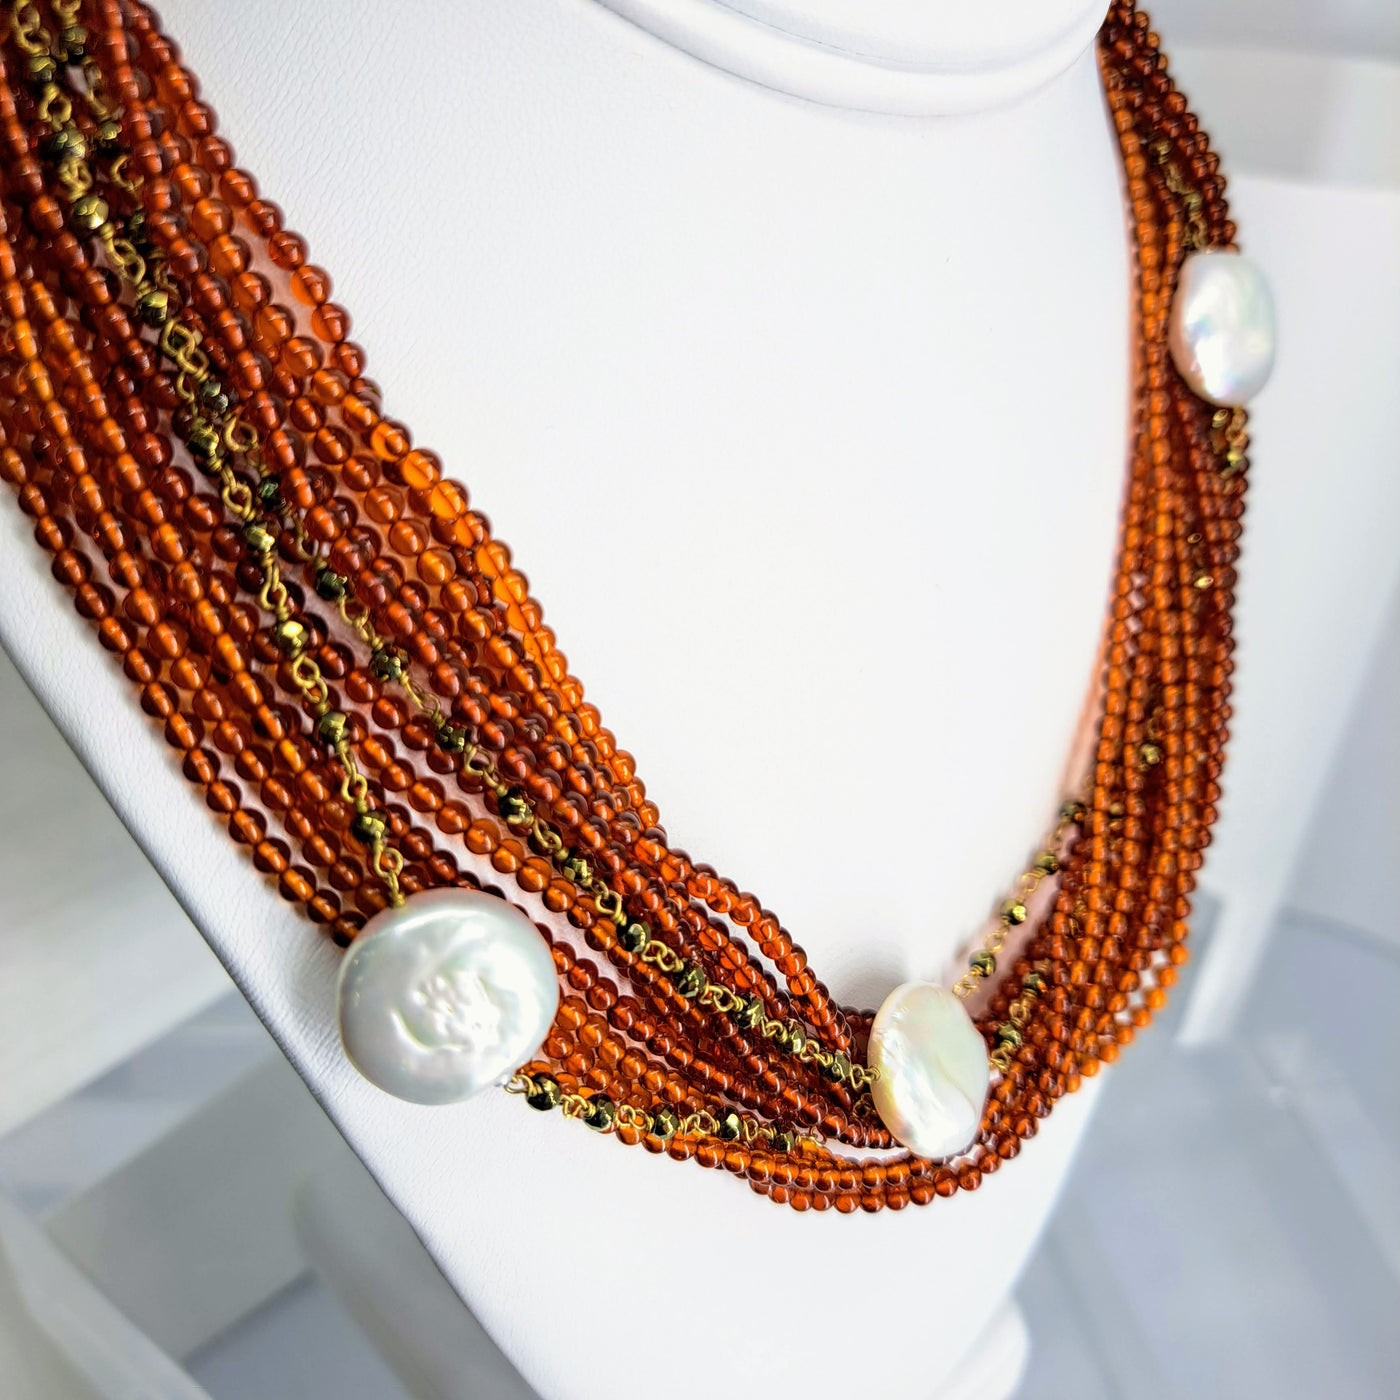 "Baltic Beauty" 16"-18" Necklace By Barb - Baltic Amber, Coin Pearls, Hematite, .925 Sterling